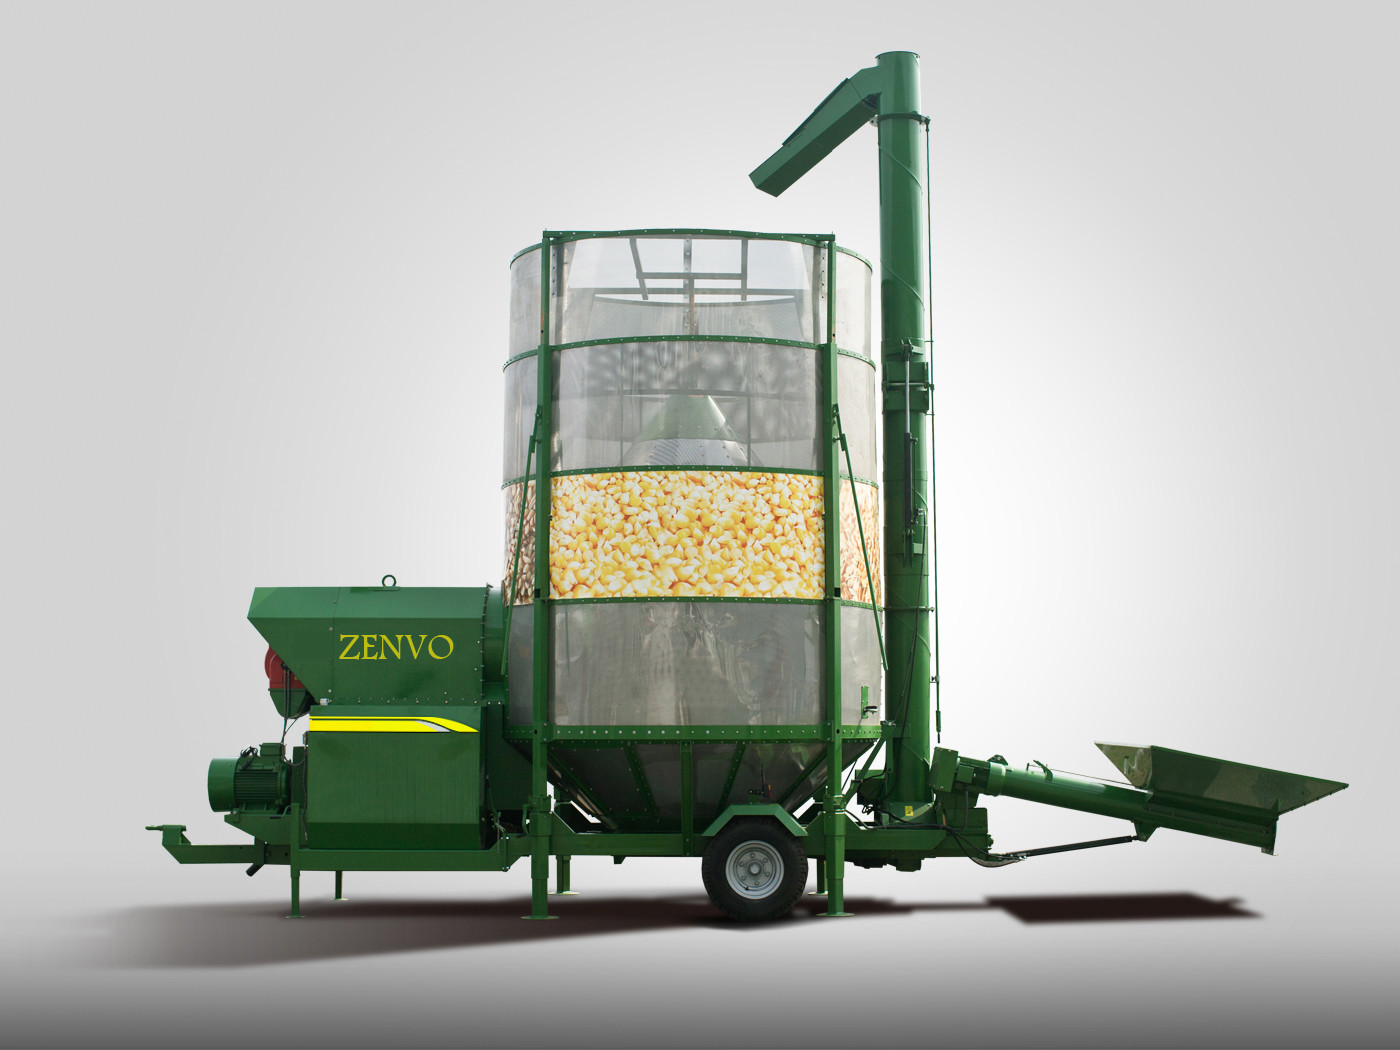 Quality Industry Portable Batch Grain Dryers For Rice Drying Capacity 10 - 30 M3 for sale